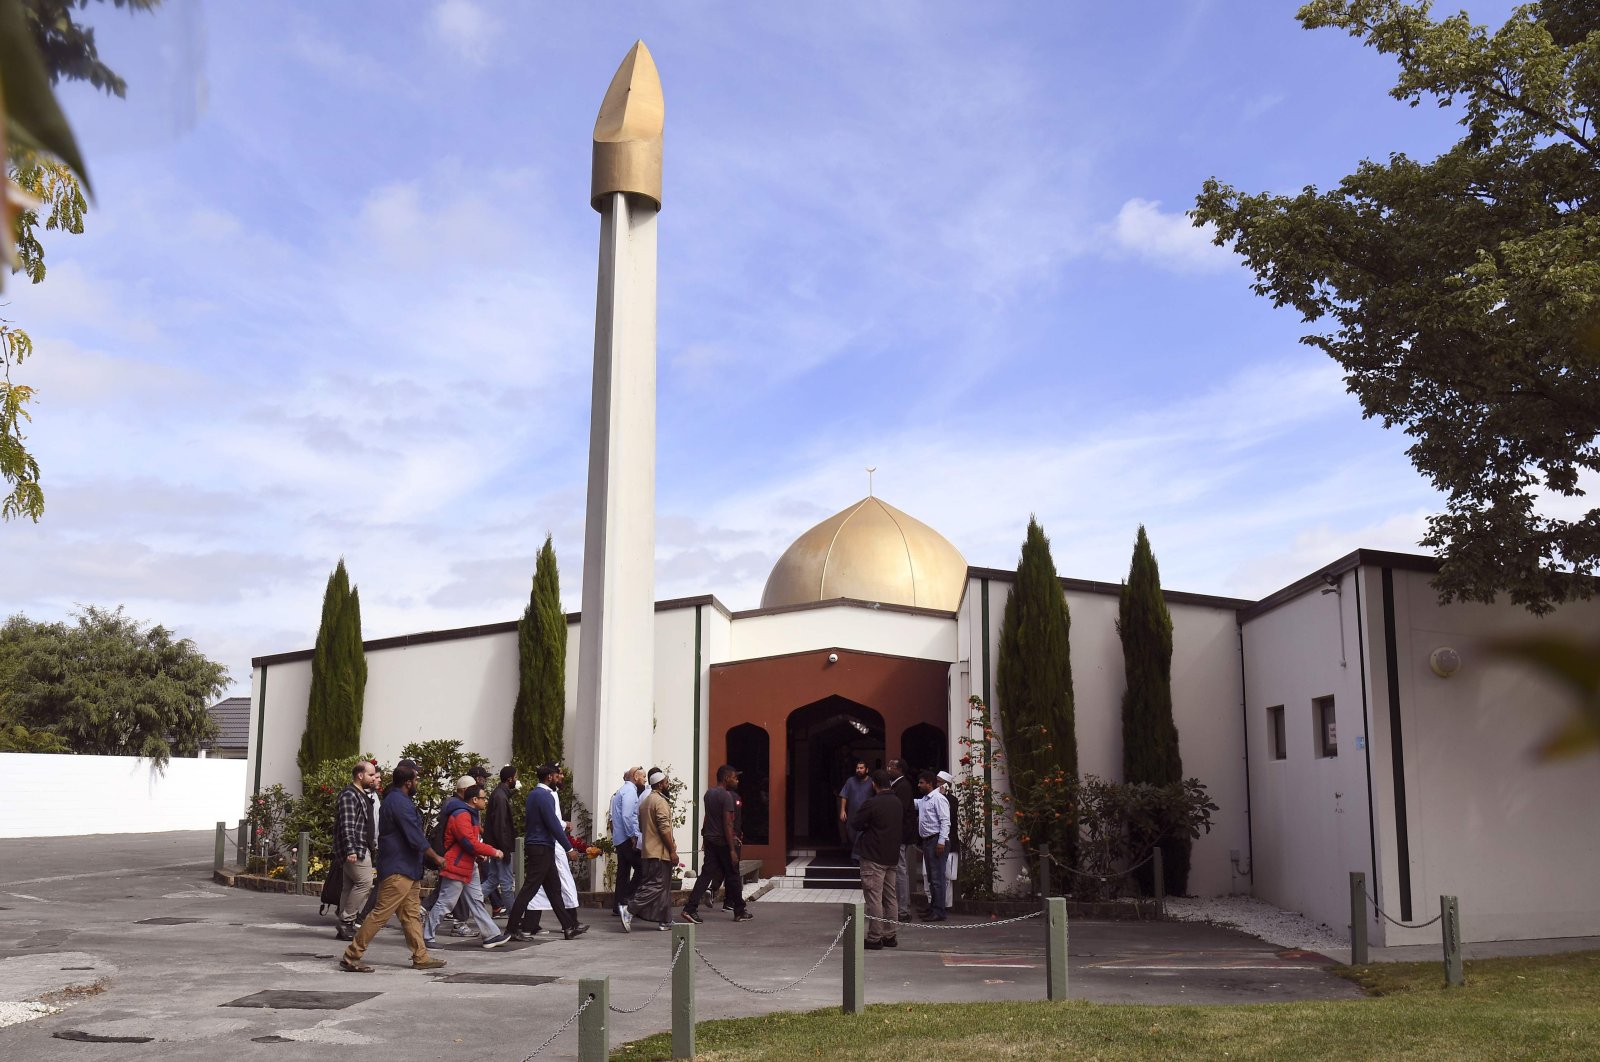 Members of the local Muslim community enter the Al Noor mosque after it was reopened in Christchurch, March 23, 2019. (AFP Photo)